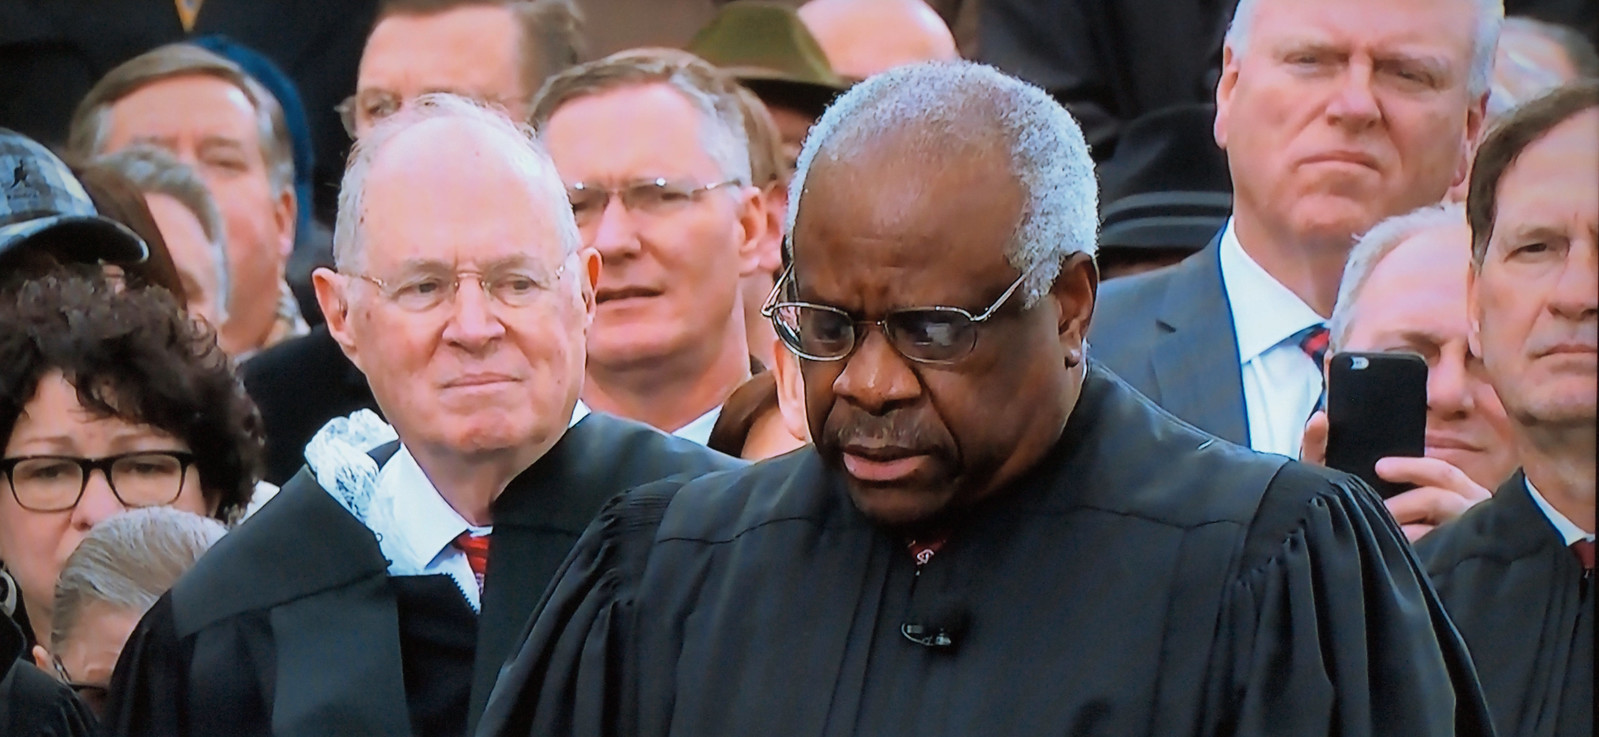 Justice Thomas SPEAKS! | Normally reticent at Supreme Court … | Flickr